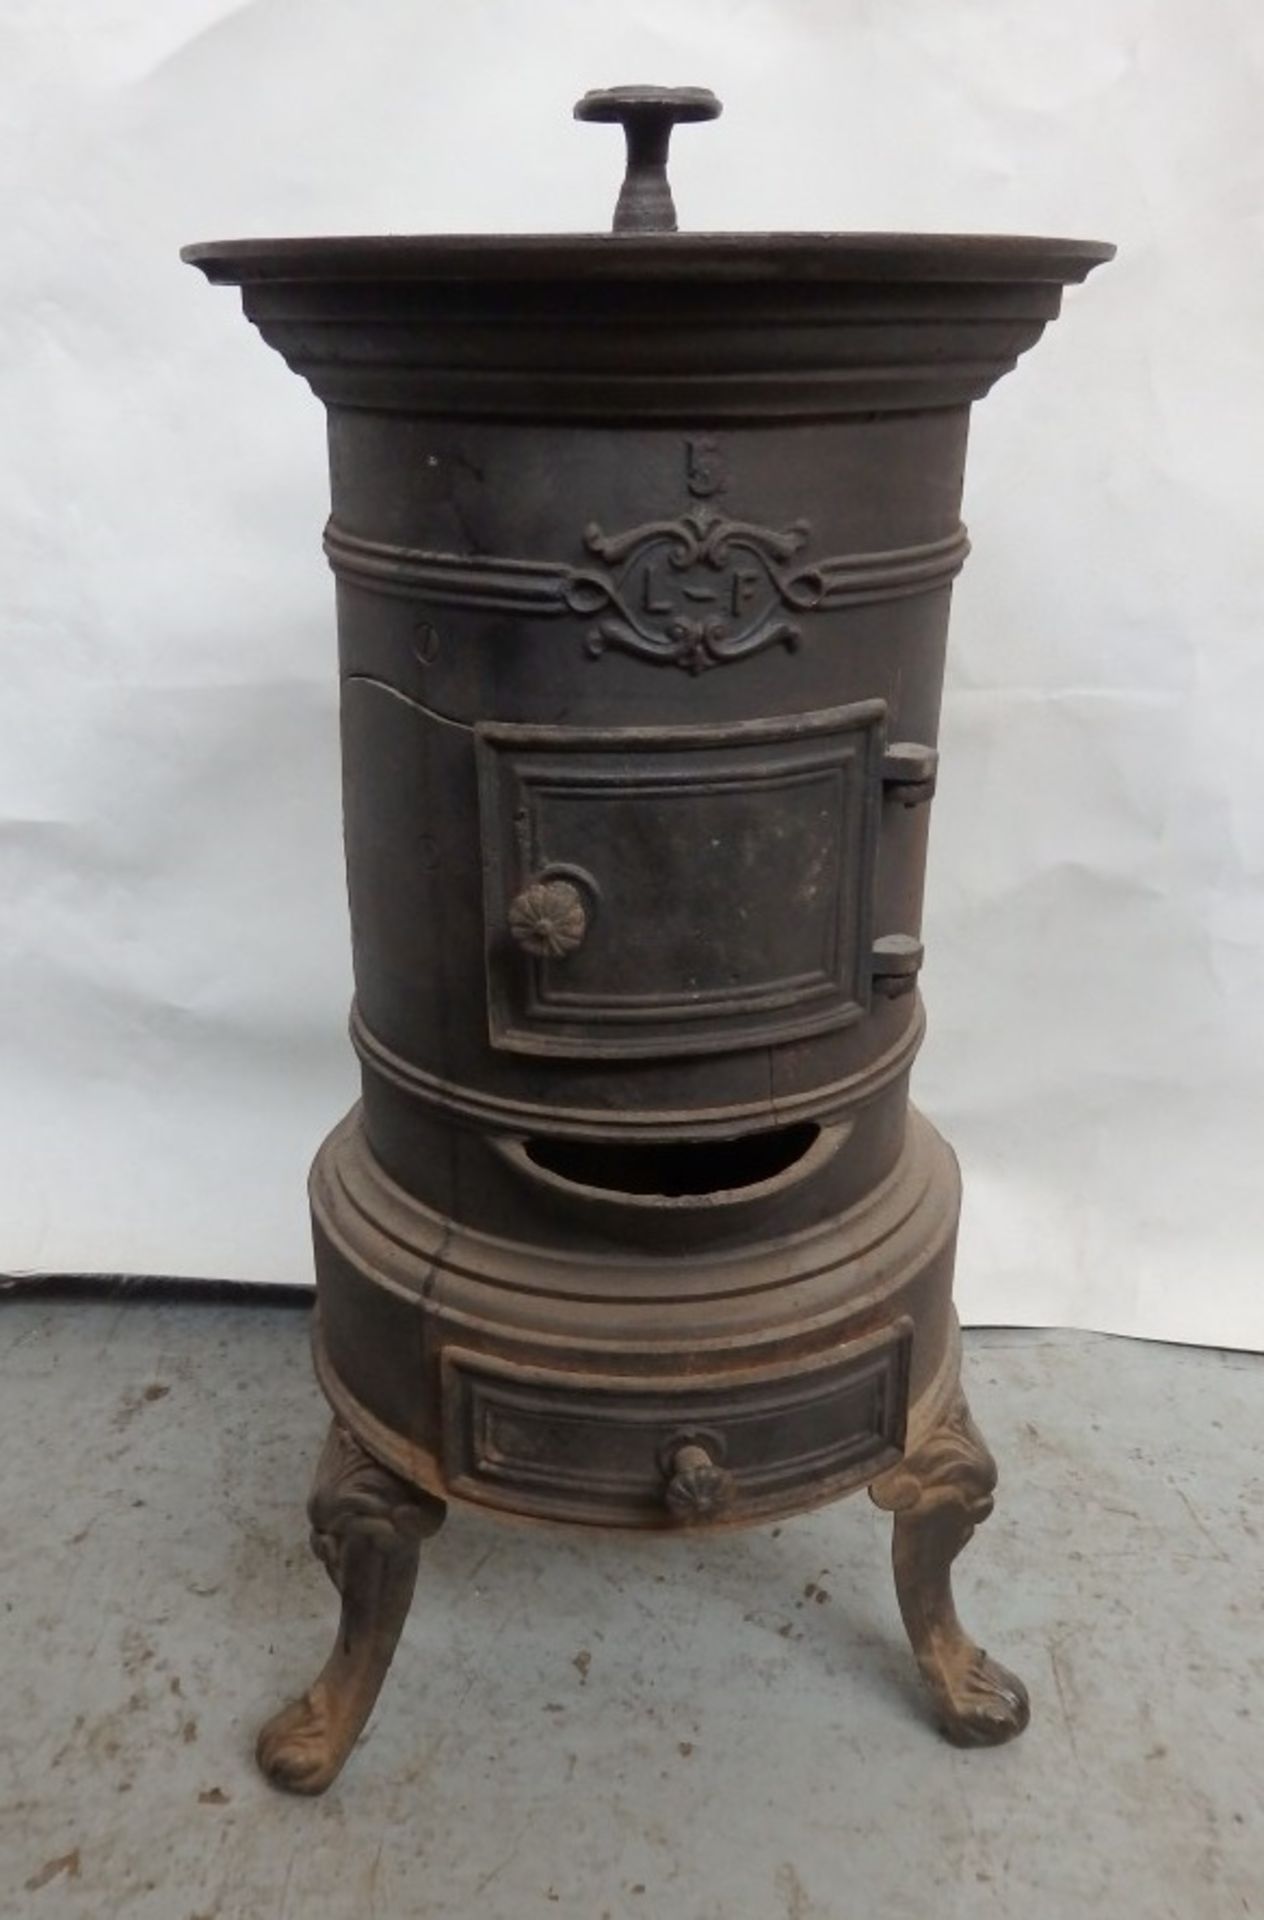 1 x Reclaimed Antique Cast Iron Potbelly Wood Burner / Stove - Dimensions: H61, Diameter 30cm - - Image 10 of 18